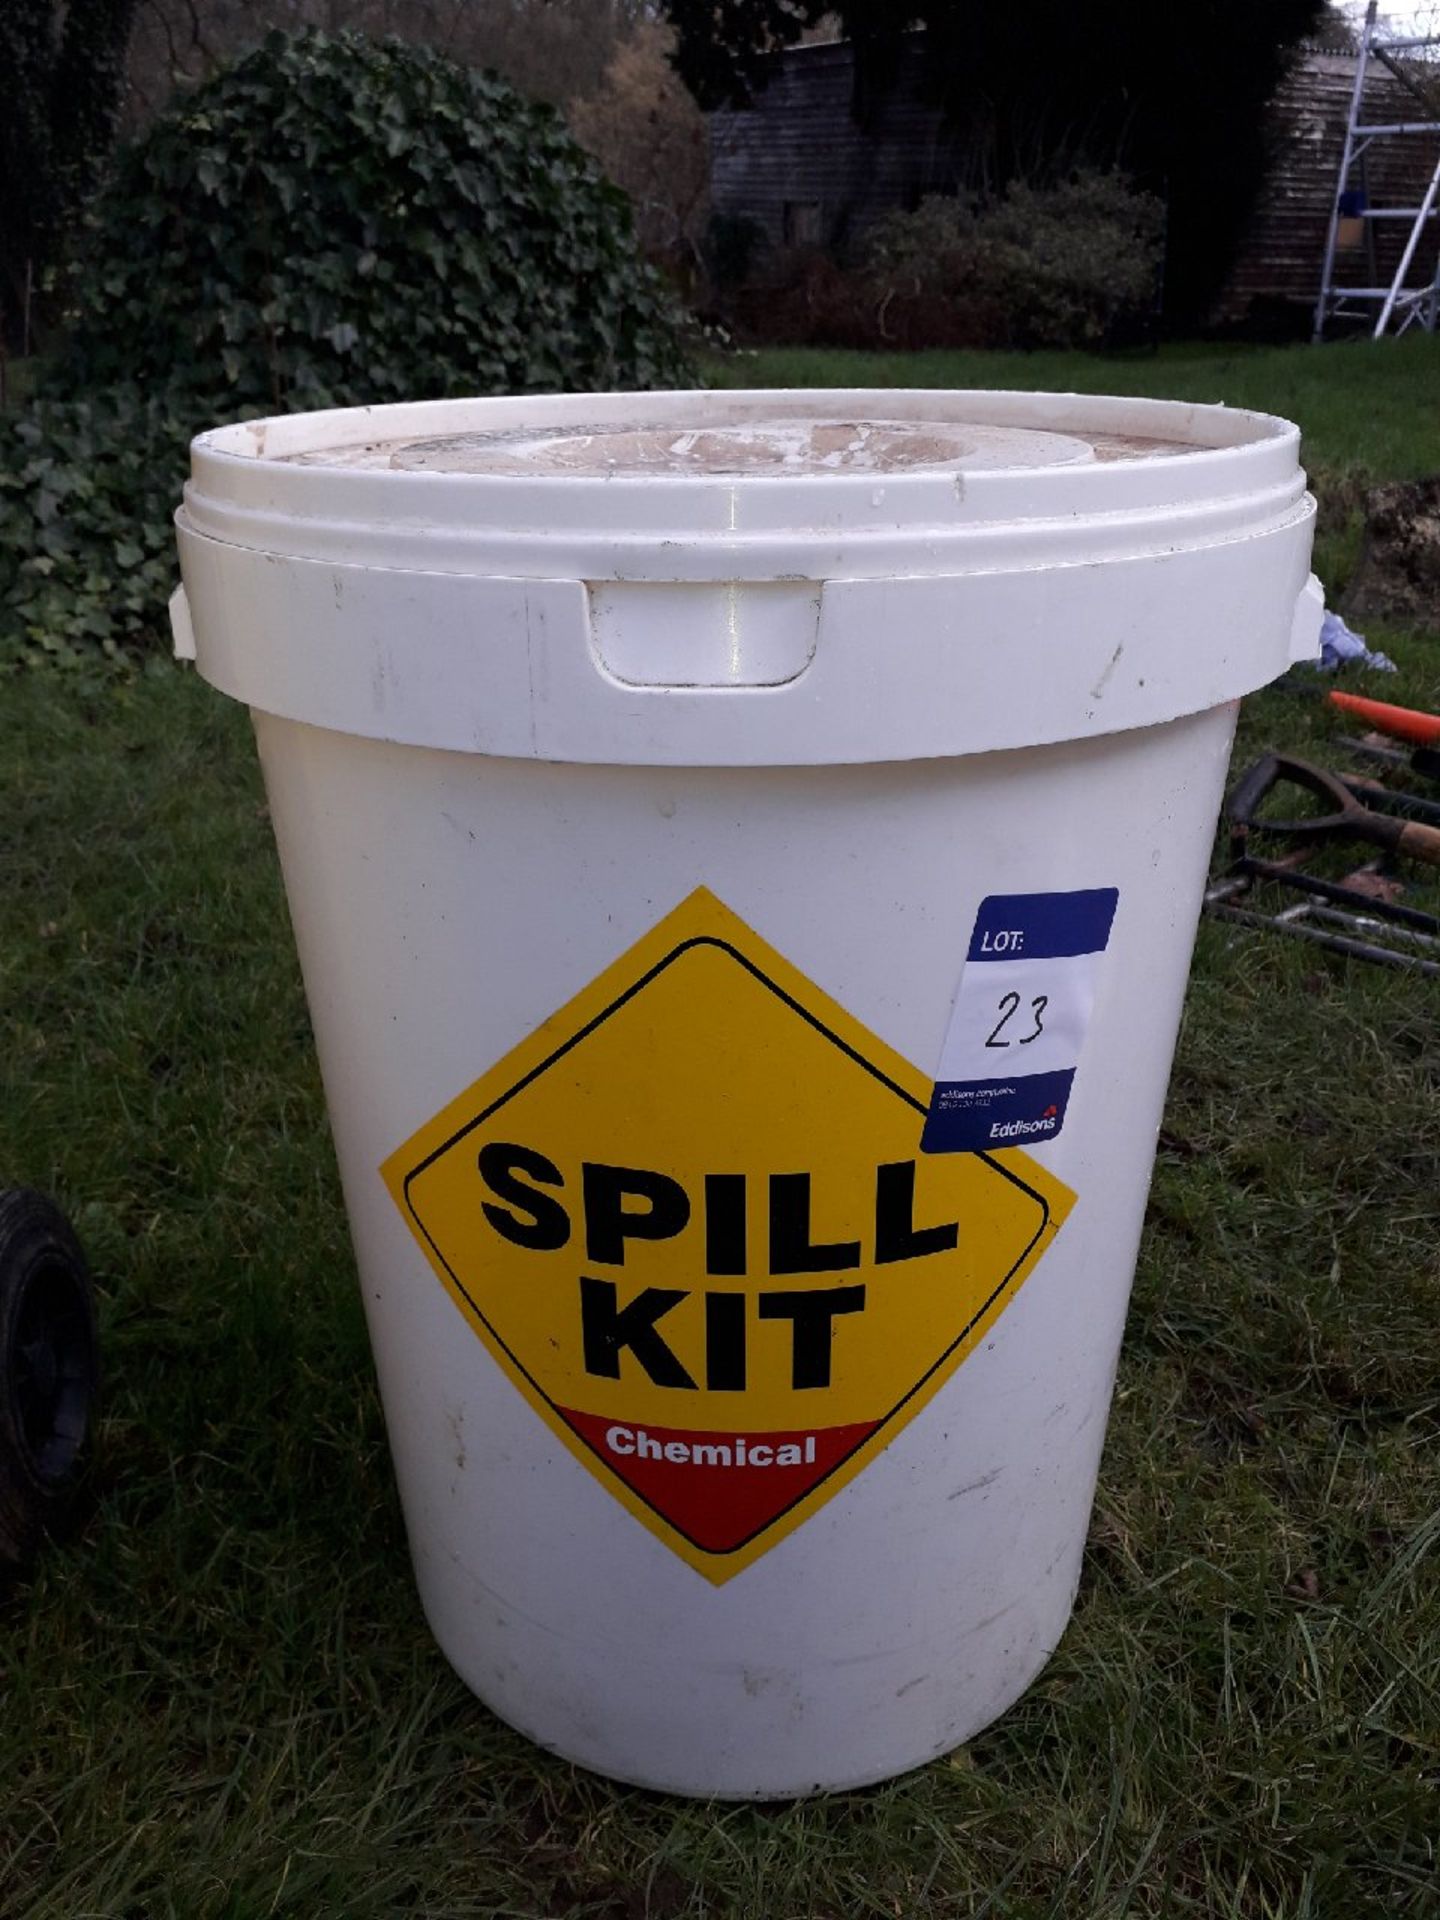 Chemical spill kit. (Please note: Viewing is by appointment only. Please Tel: 0161 429 5800)